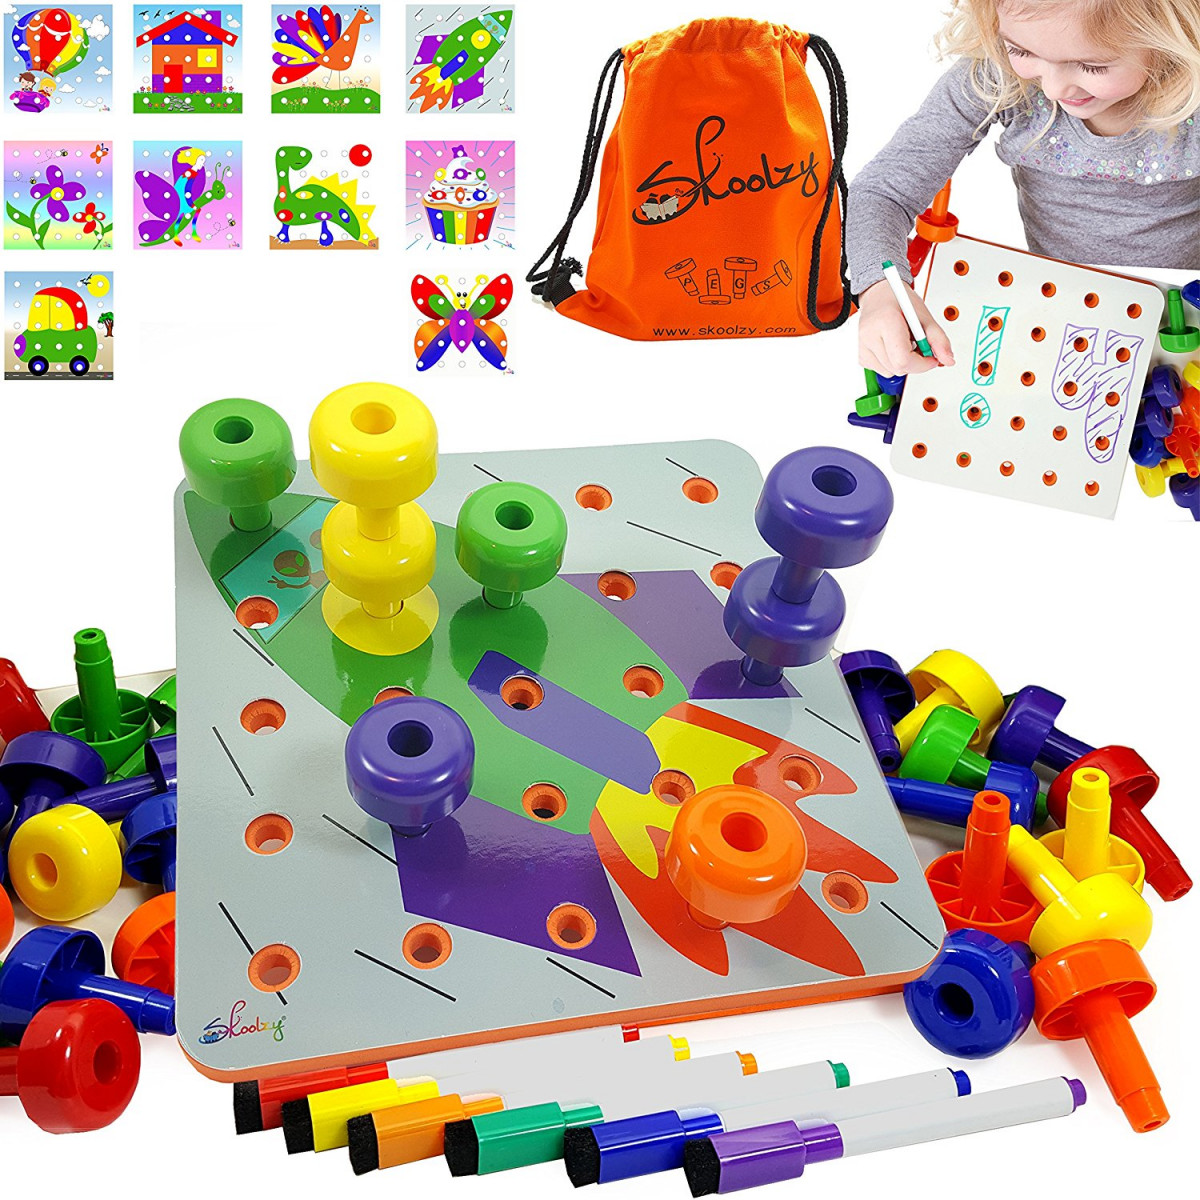 creative toys for 4 year old boy